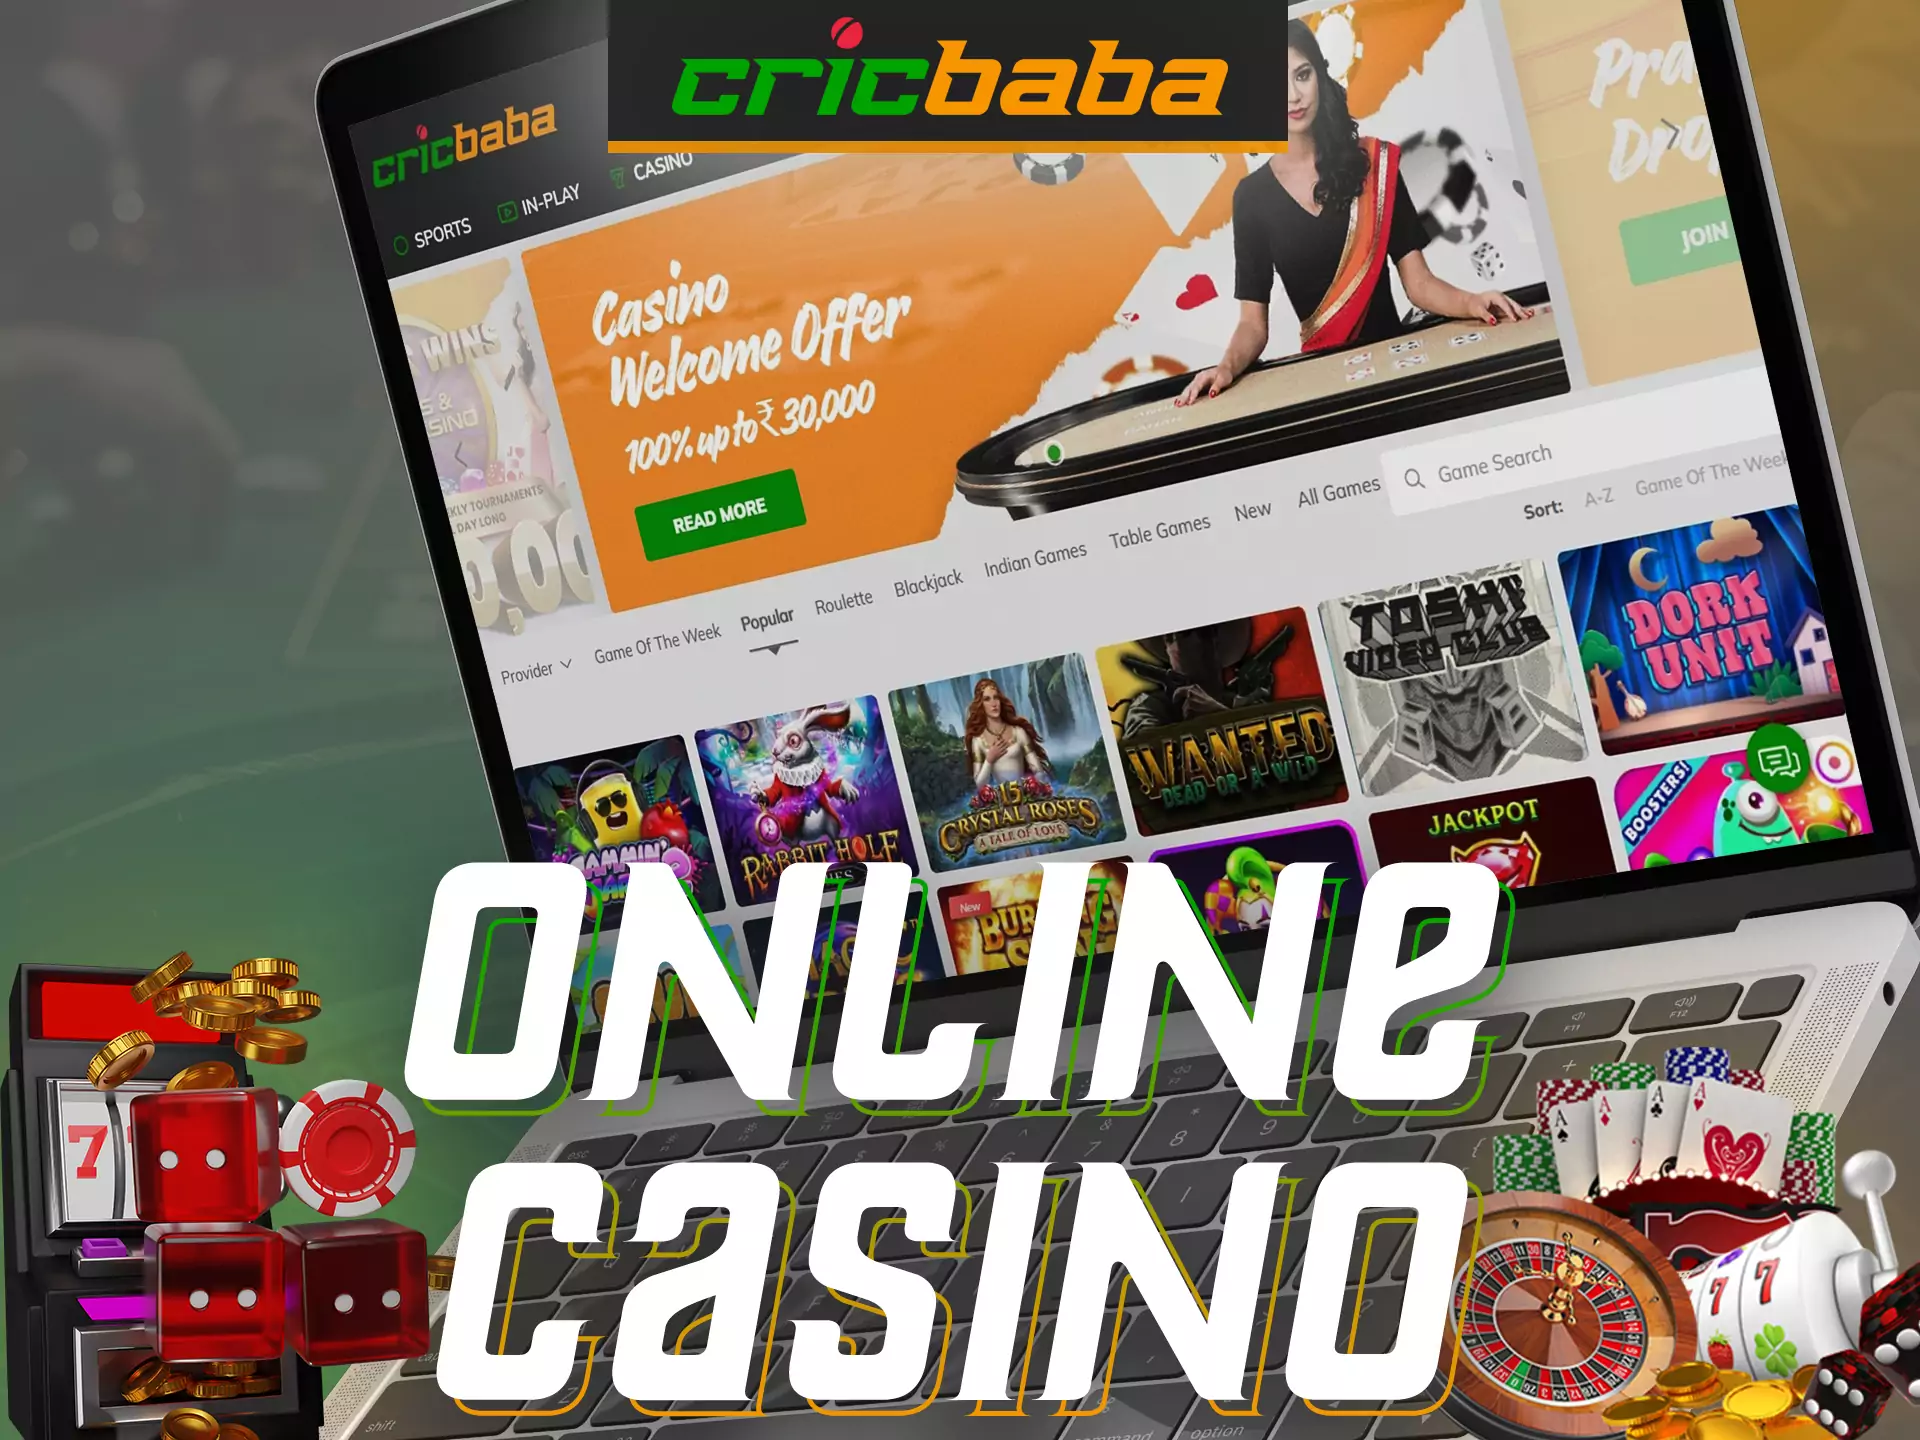 There are many different games and nice bonuses in Cricbaba online casino.